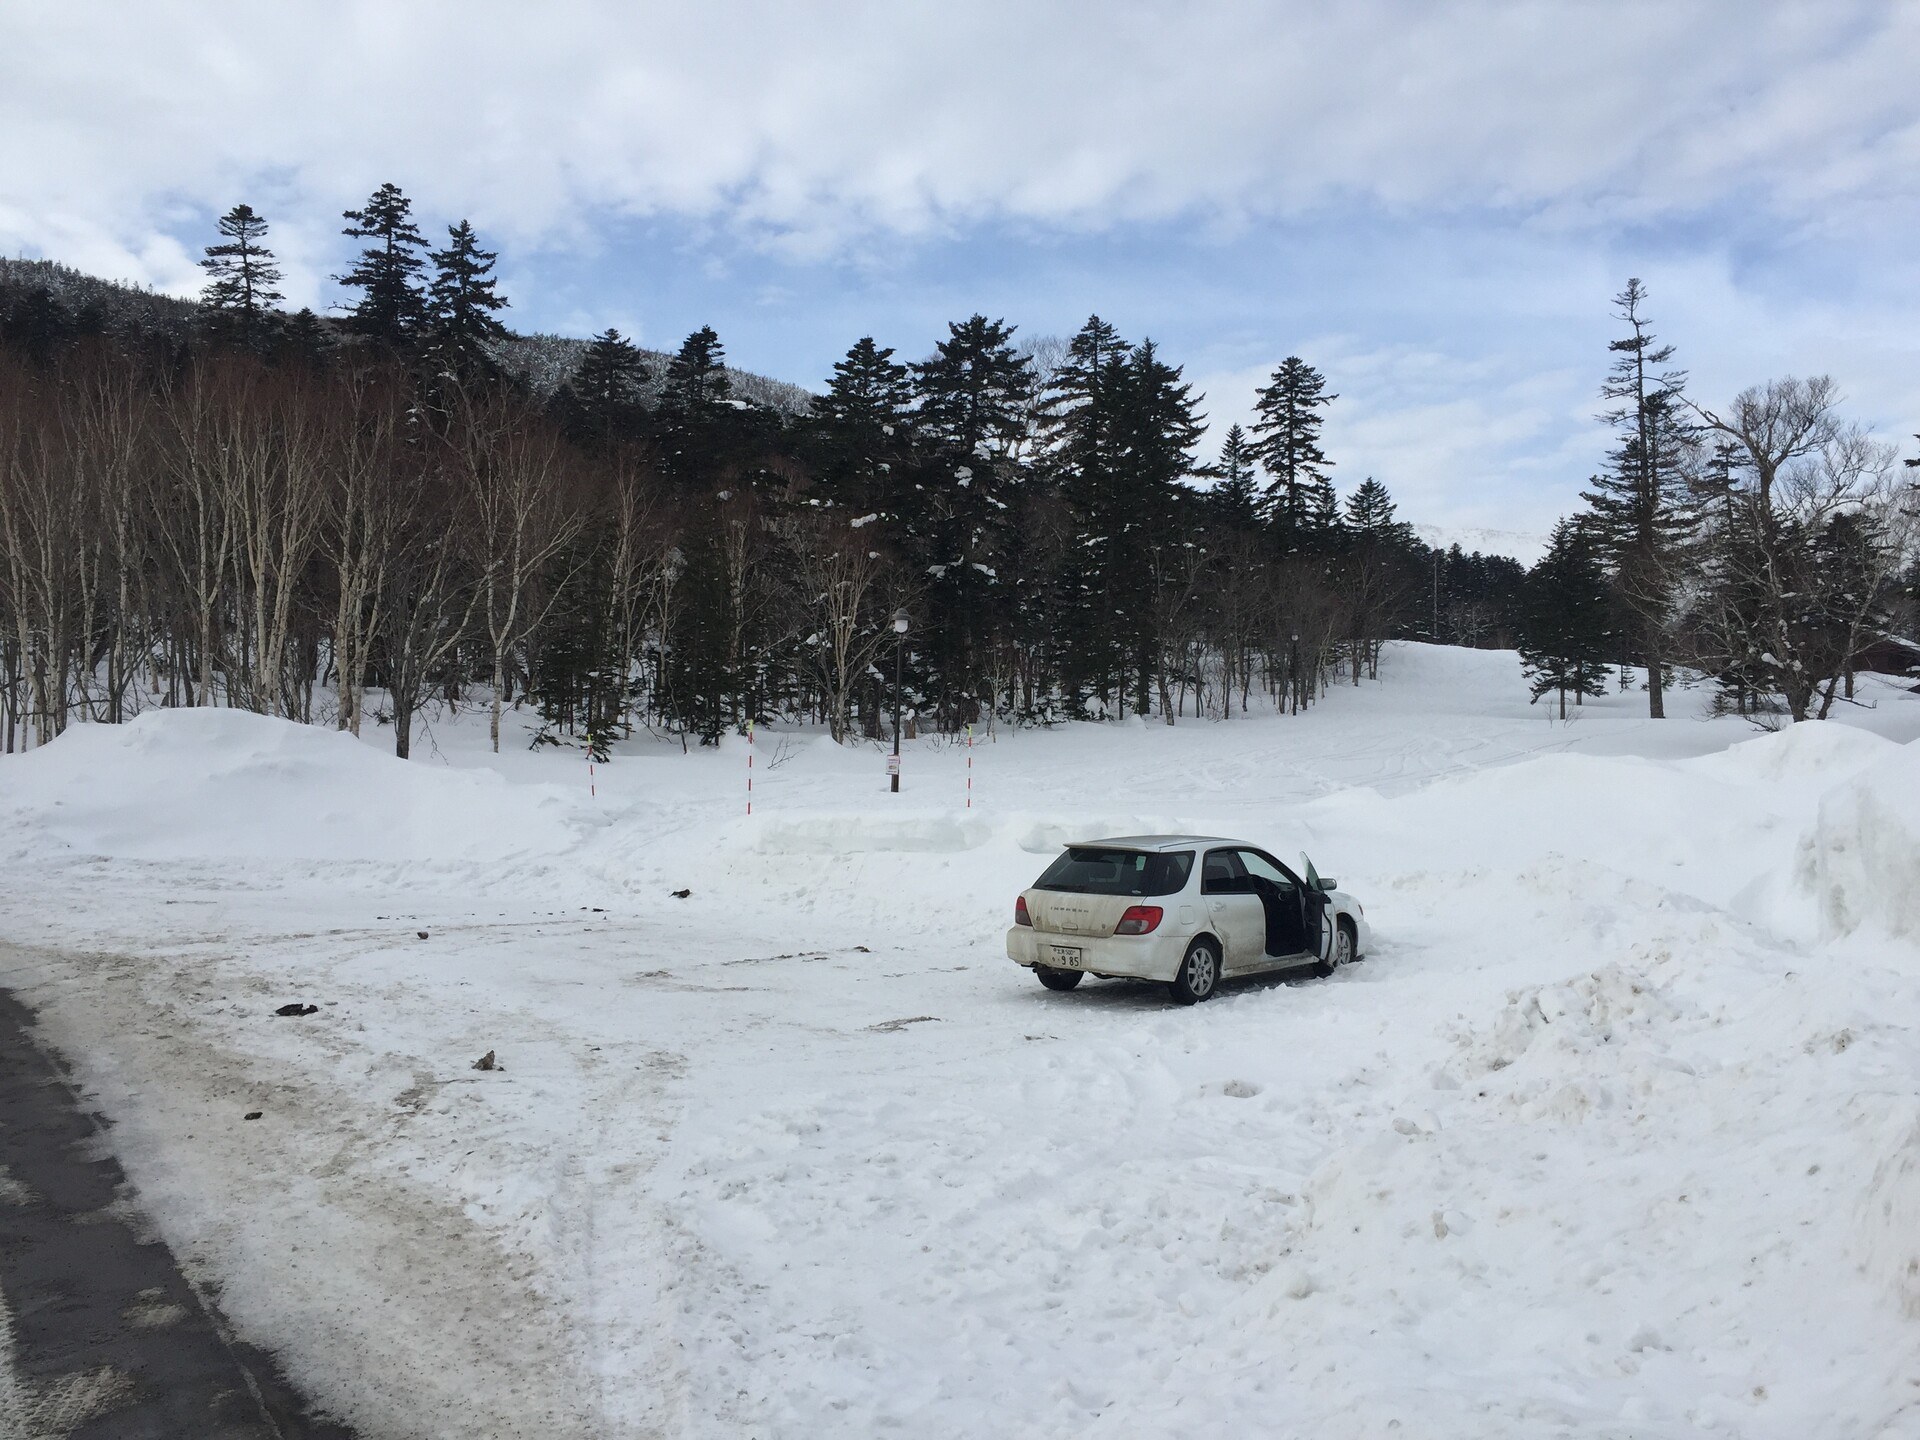 My Subaru Impreza parked in a big ploughed-out car park on the side of the road, snow all round and a forested slope beyond